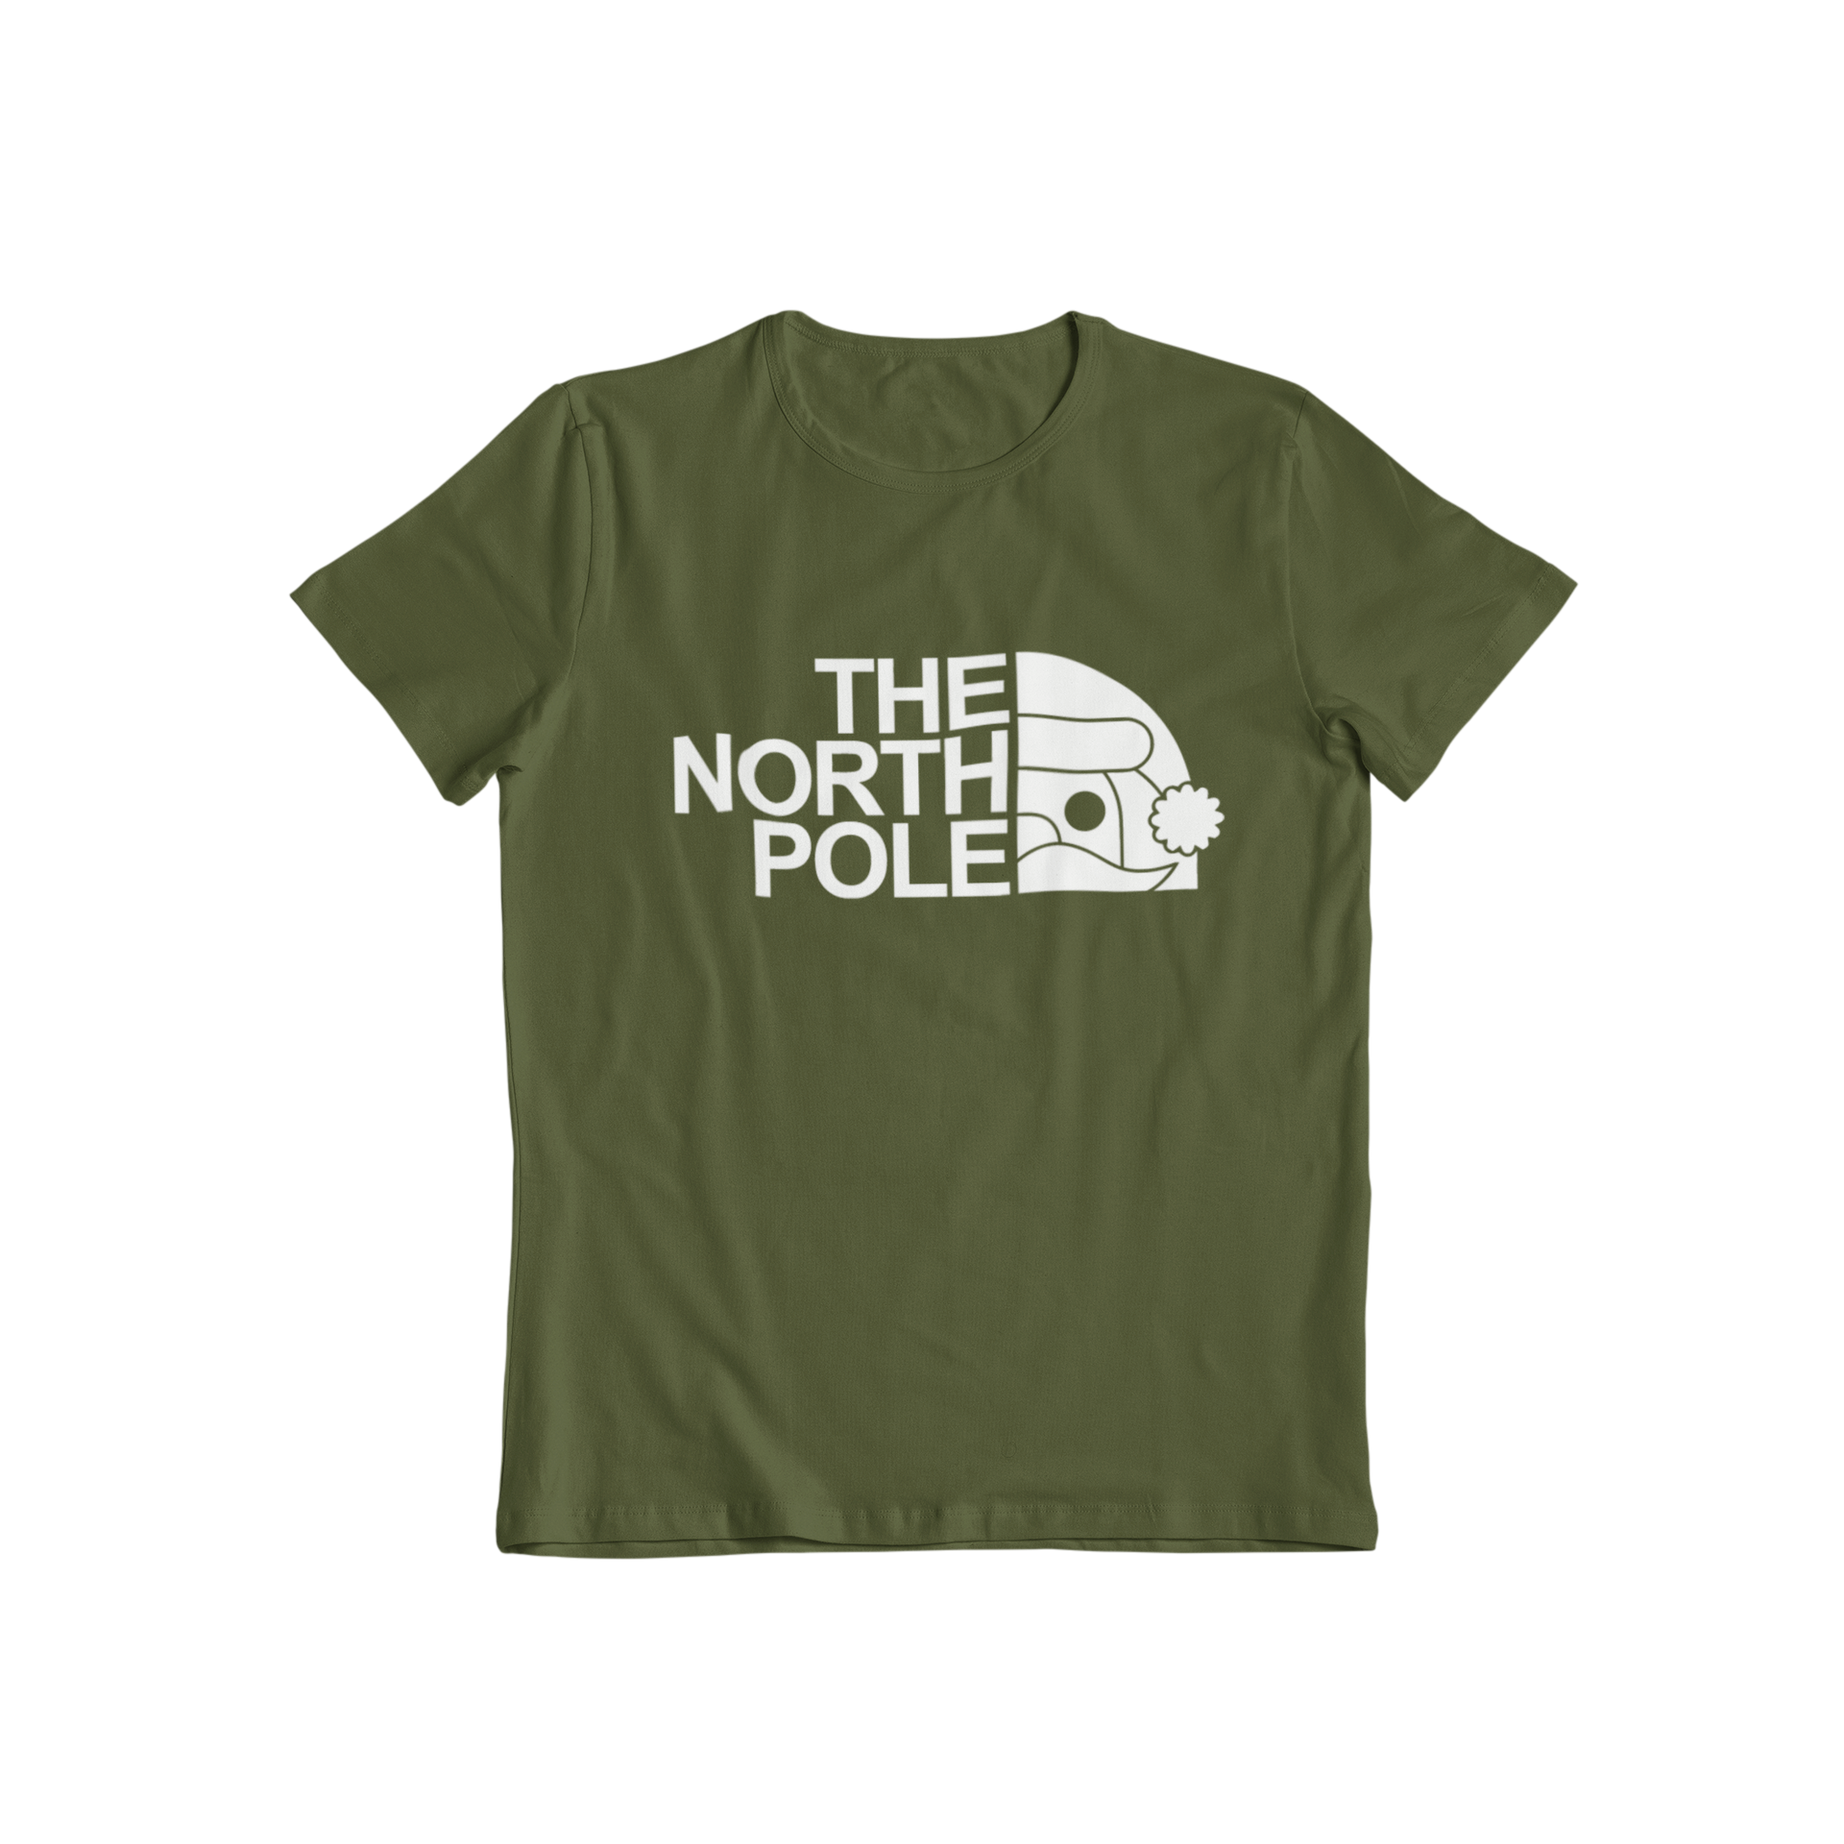 Get into the festive spirit with Teevolution's North Pole Santa graphic Christmas tee. Perfect for Christmas parties, the pub or dinner, this tee will make you the center of attention. Get one now and spread the holiday cheer!